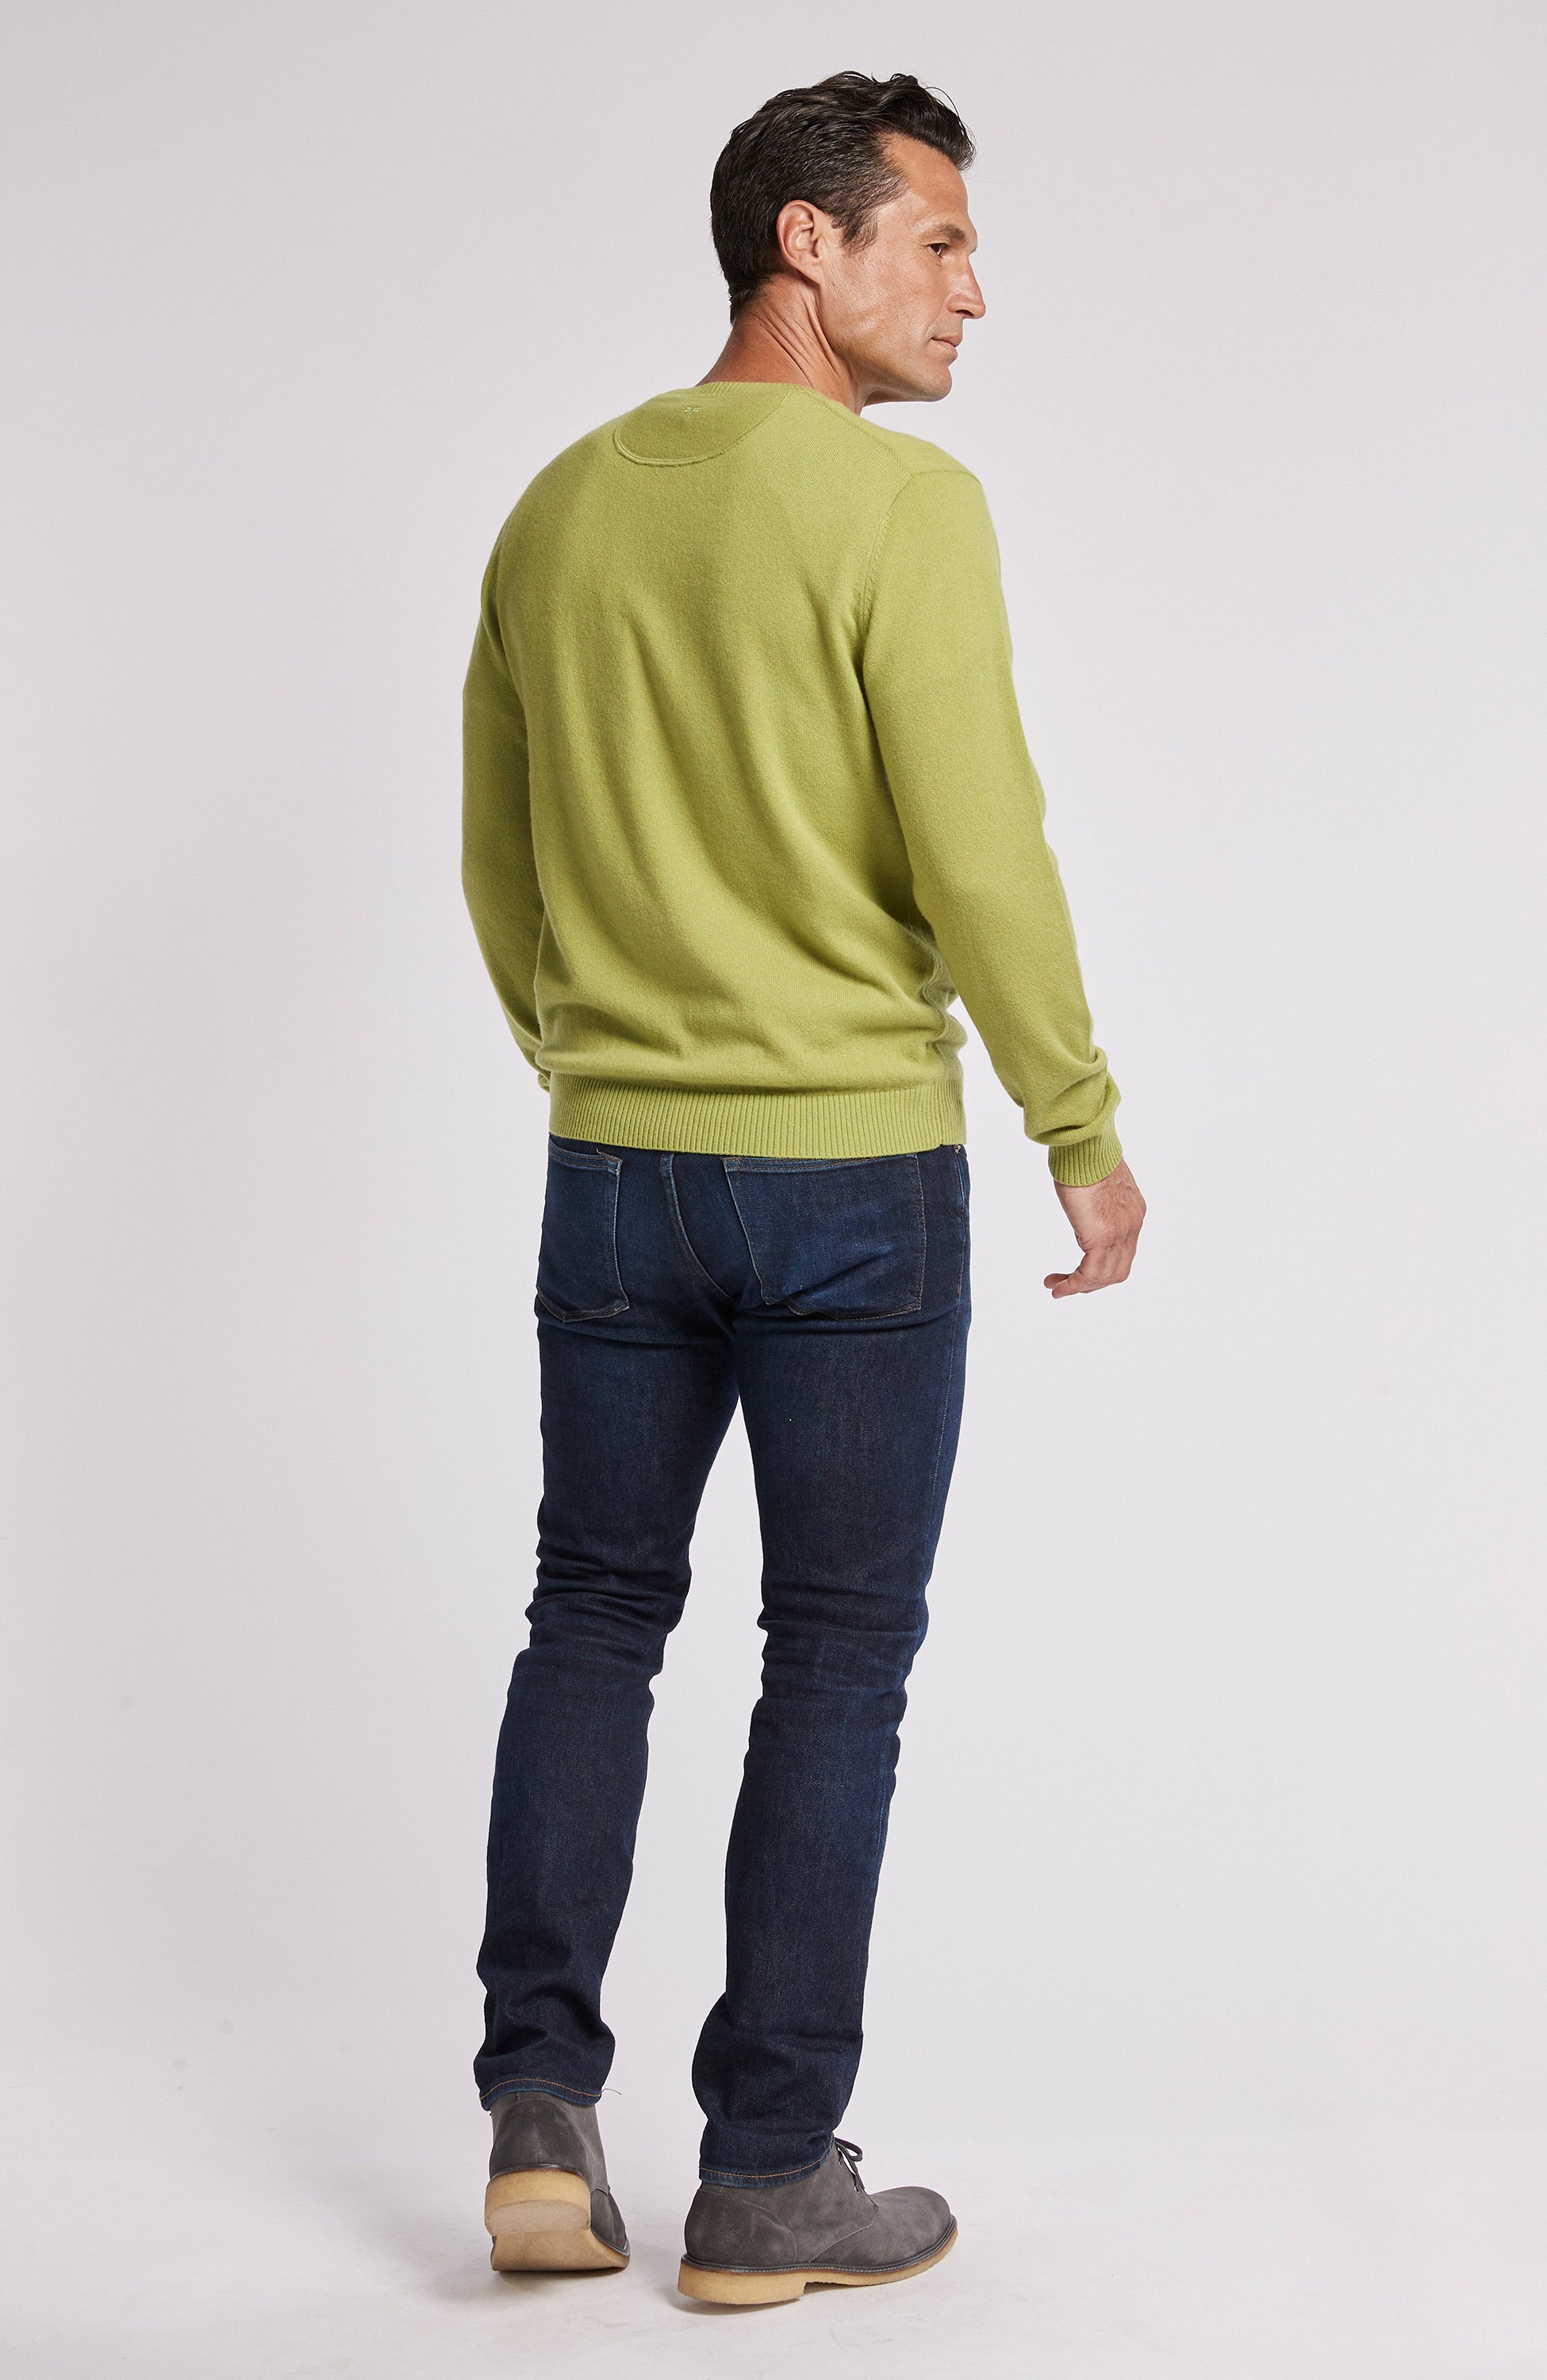 100% CASHMERE CREW NECK LONG SLEEVE SWEATER - CHARTREUSE